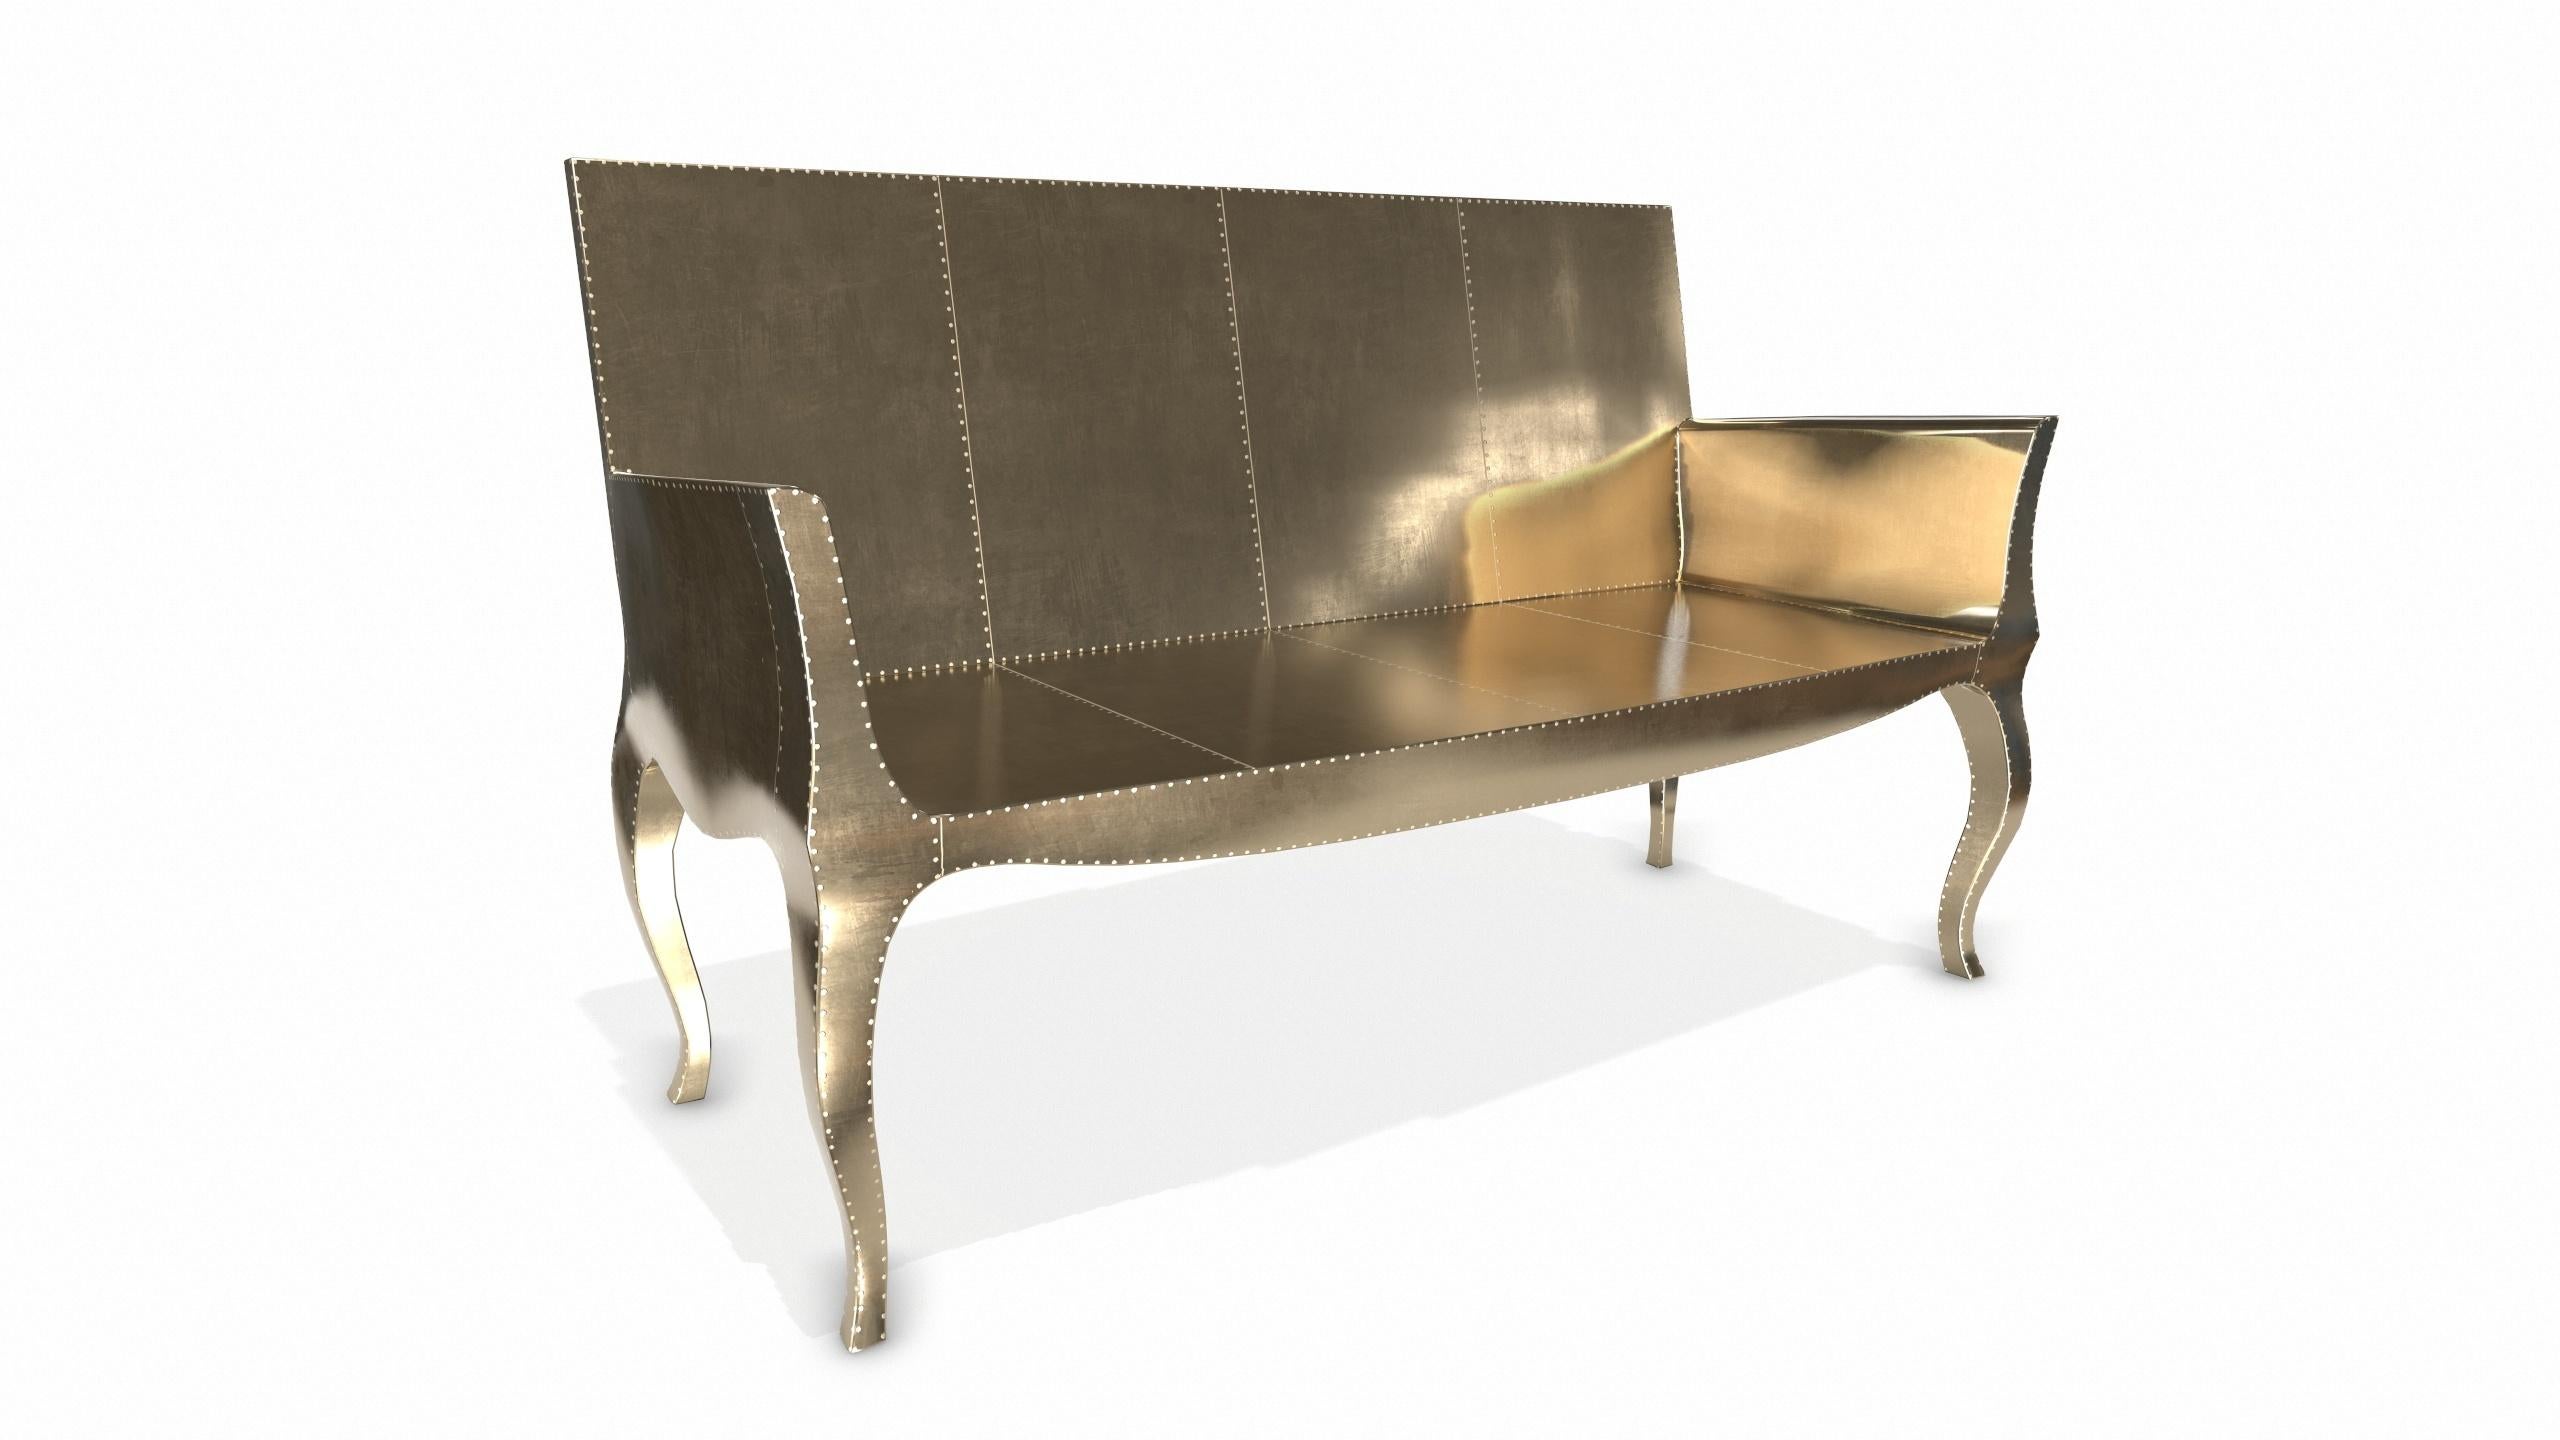 Contemporary Louise Settee Art Deco Daybeds in Smooth Brass by Paul Mathieu for S Odegard For Sale